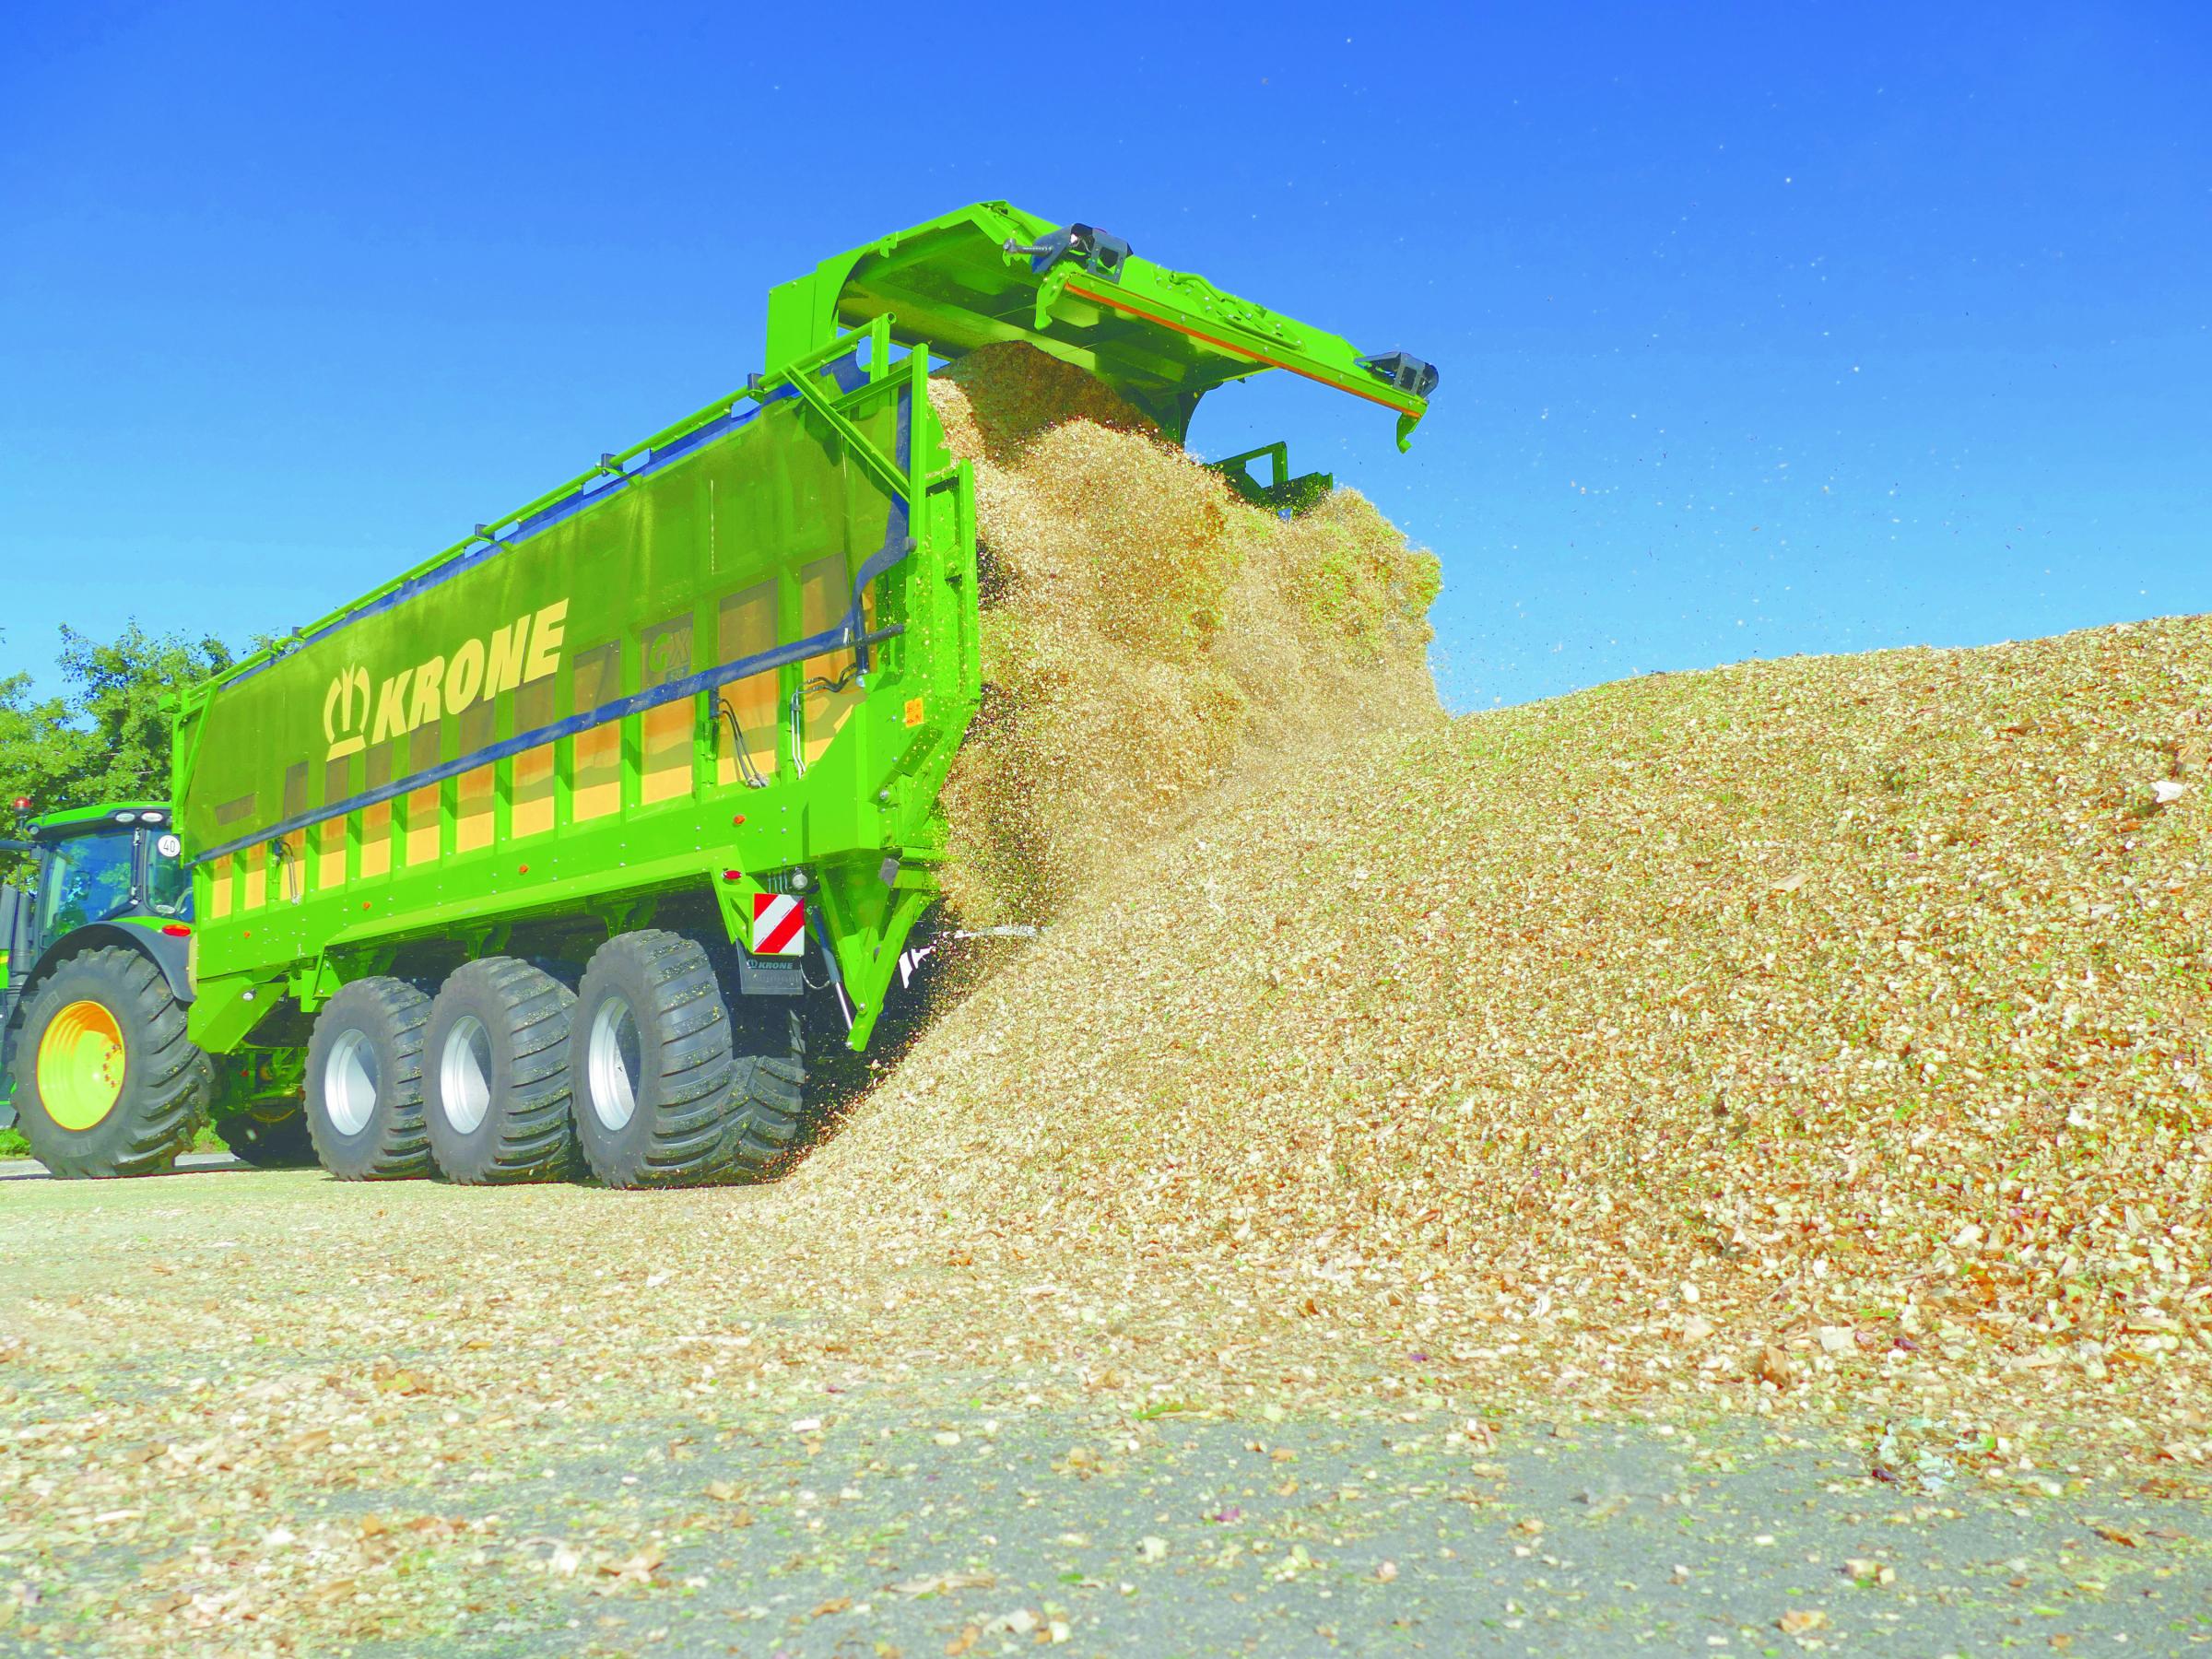 Krone’s new smart technology, ExactUnload, helps unload silage wagons more accurately